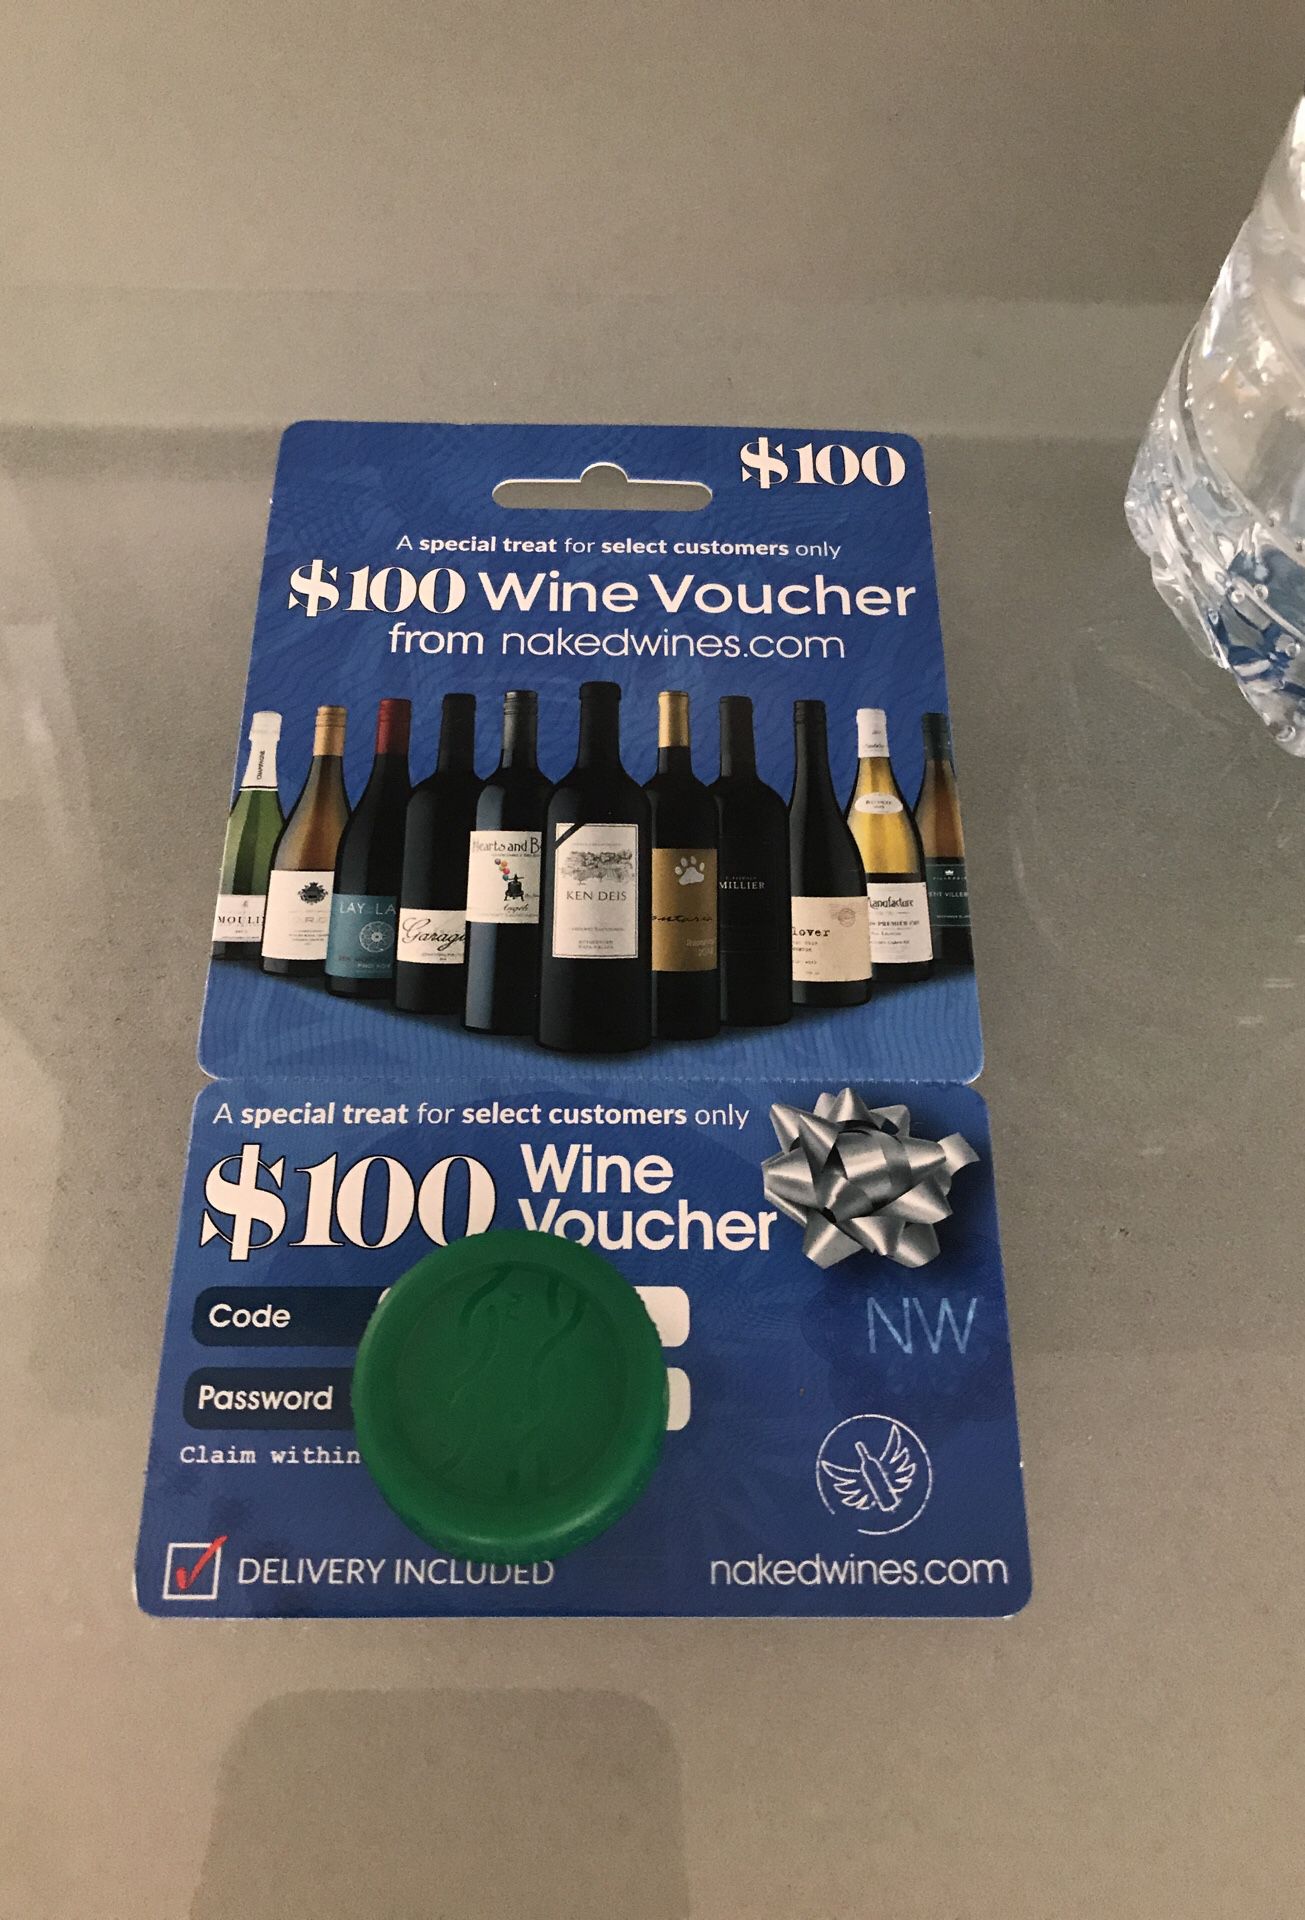 $100 wine voucher for free.